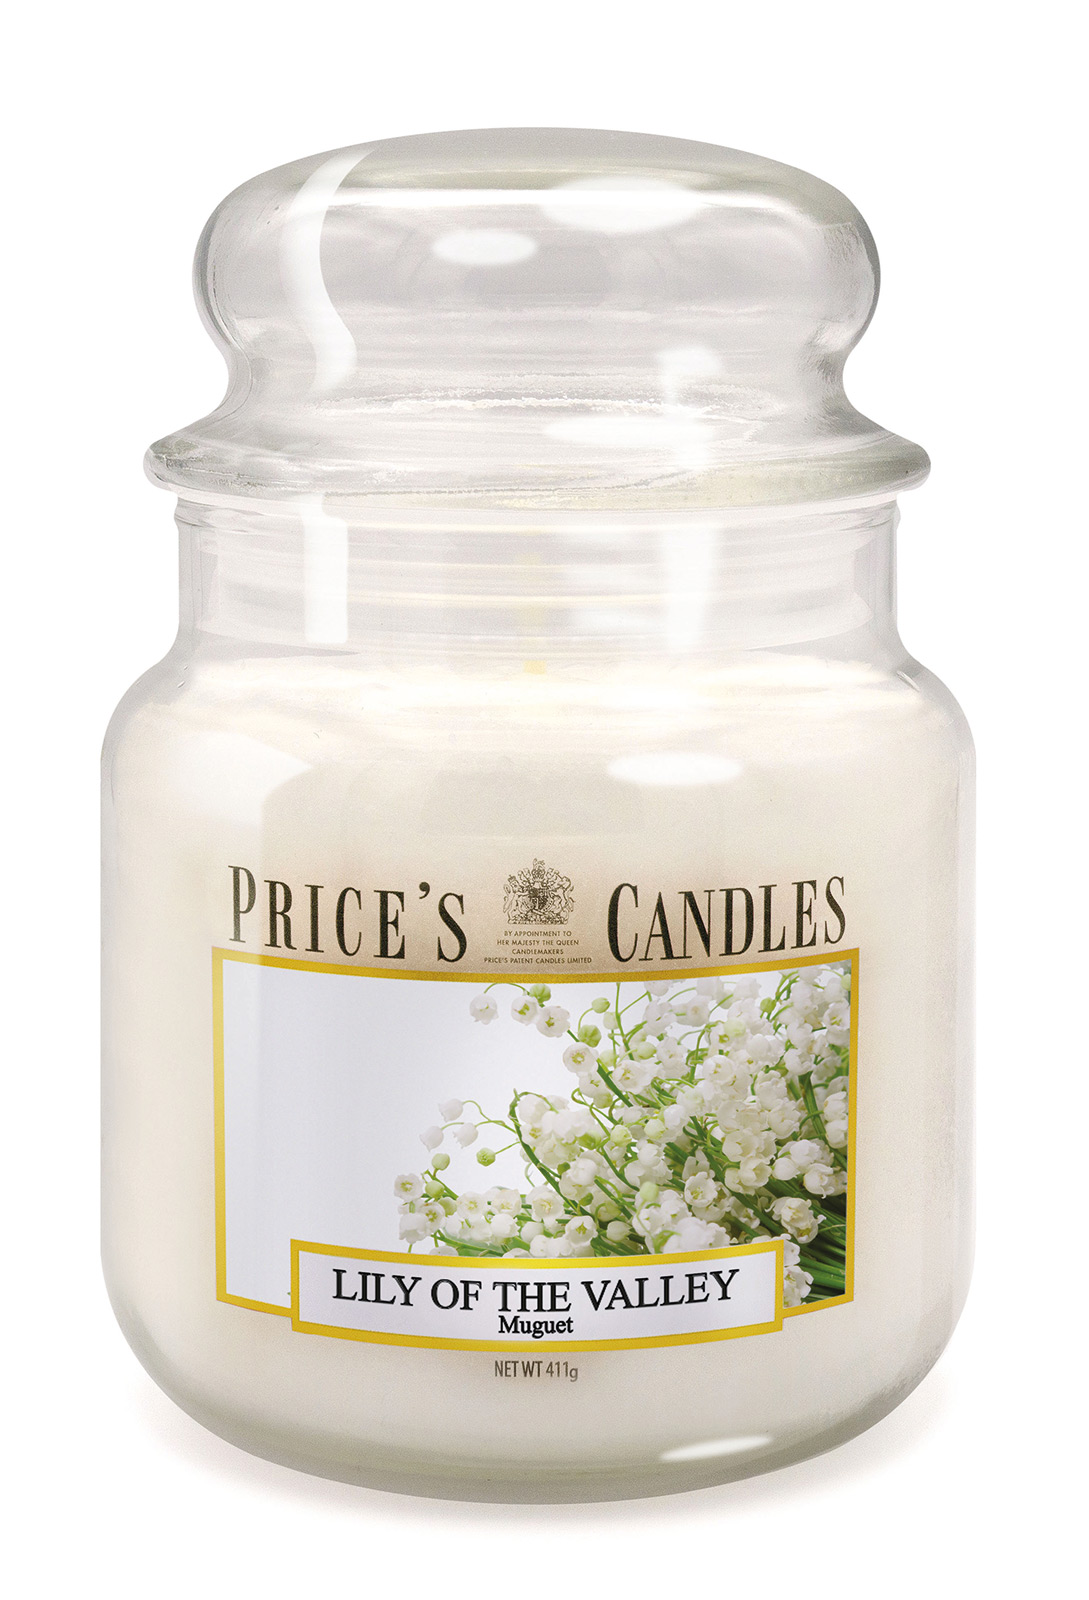 Prices Candle "Lily of the Valley" 411g